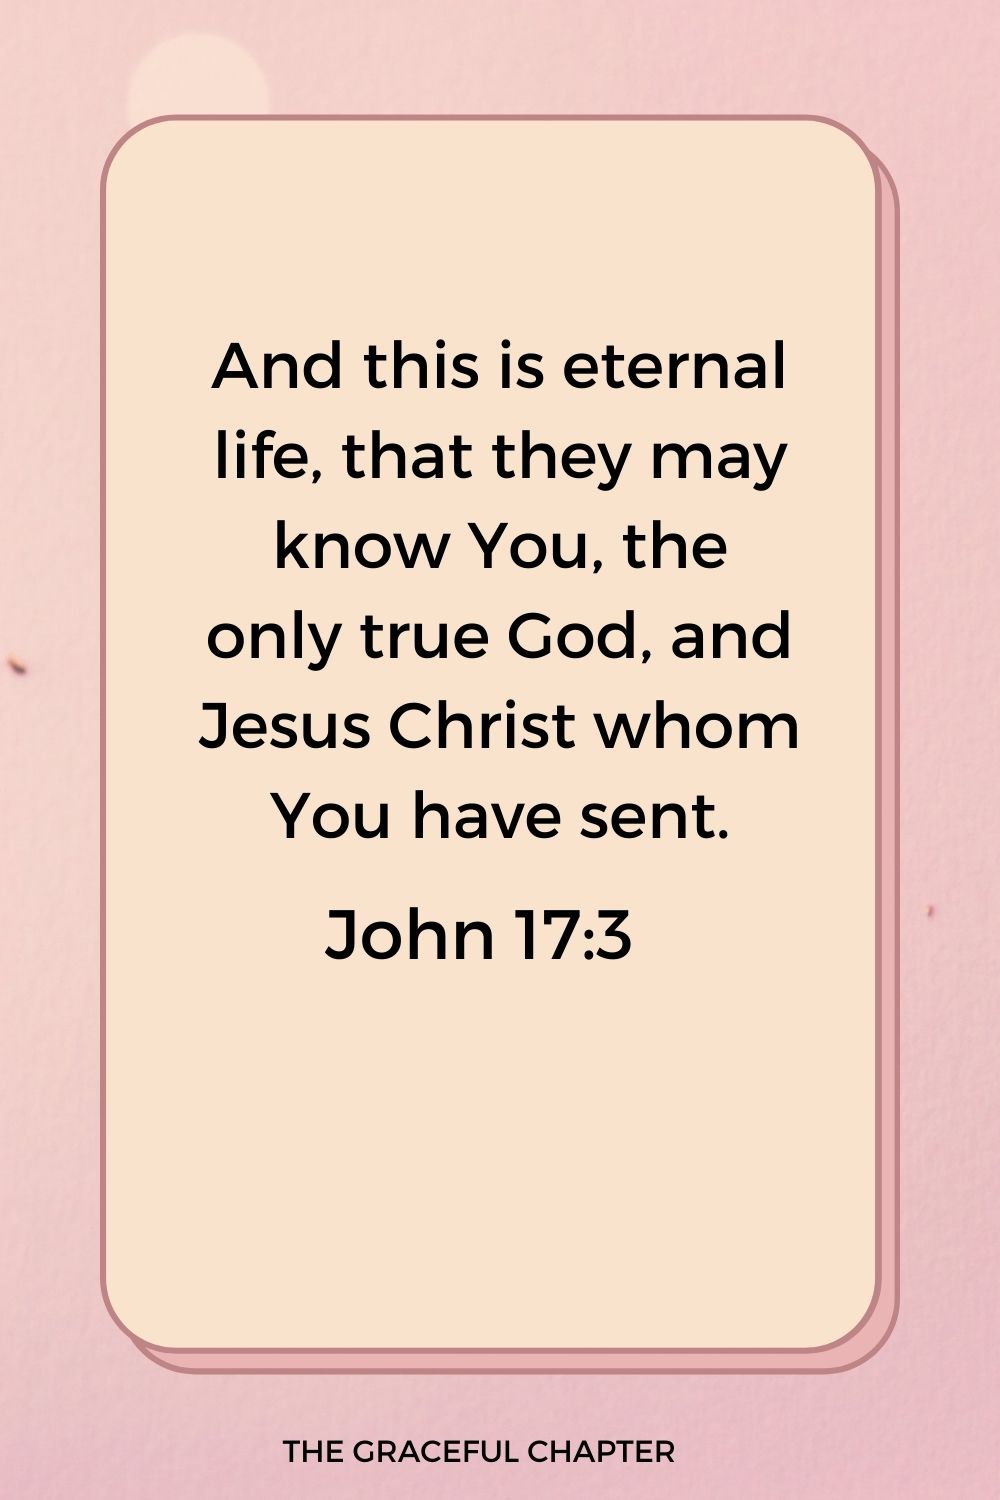 And this is eternal life, that they may know You, the only true God, and Jesus Christ whom You have sent. John 17:3